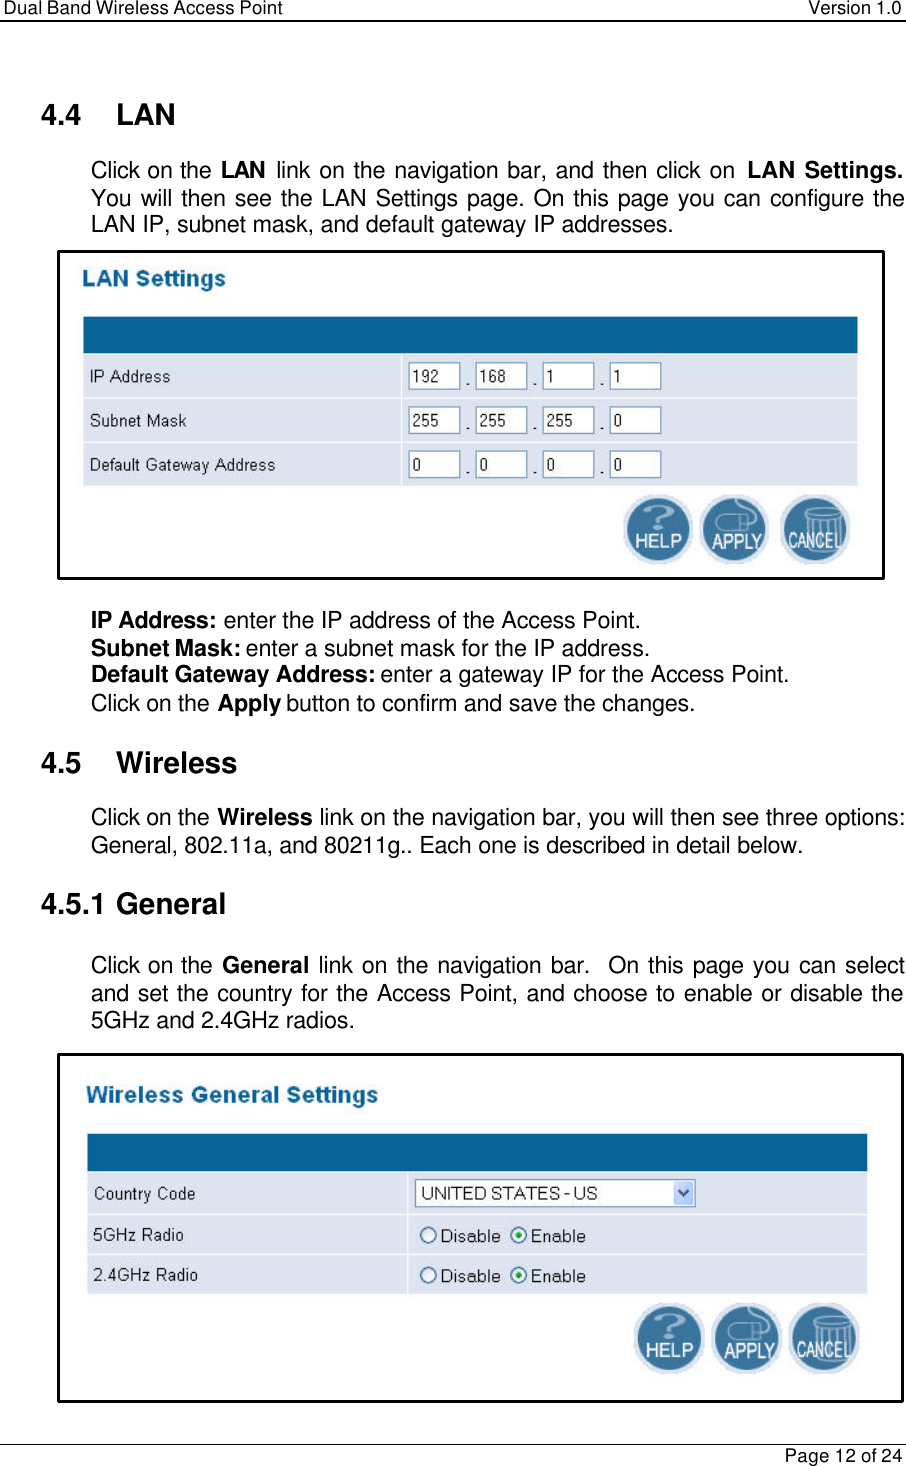 Dual Band Wireless Access Point Version 1.0Page 12 of 244.4 LAN Click on the LAN link on the navigation bar, and then click on LAN Settings.You will then see the LAN Settings page. On this page you can configure theLAN IP, subnet mask, and default gateway IP addresses. IP Address: enter the IP address of the Access Point. Subnet Mask: enter a subnet mask for the IP address. Default Gateway Address: enter a gateway IP for the Access Point. Click on the Apply button to confirm and save the changes.4.5 Wireless Click on the Wireless link on the navigation bar, you will then see three options:General, 802.11a, and 80211g.. Each one is described in detail below.4.5.1 General Click on the General link on the navigation bar.  On this page you can selectand set the country for the Access Point, and choose to enable or disable the5GHz and 2.4GHz radios.